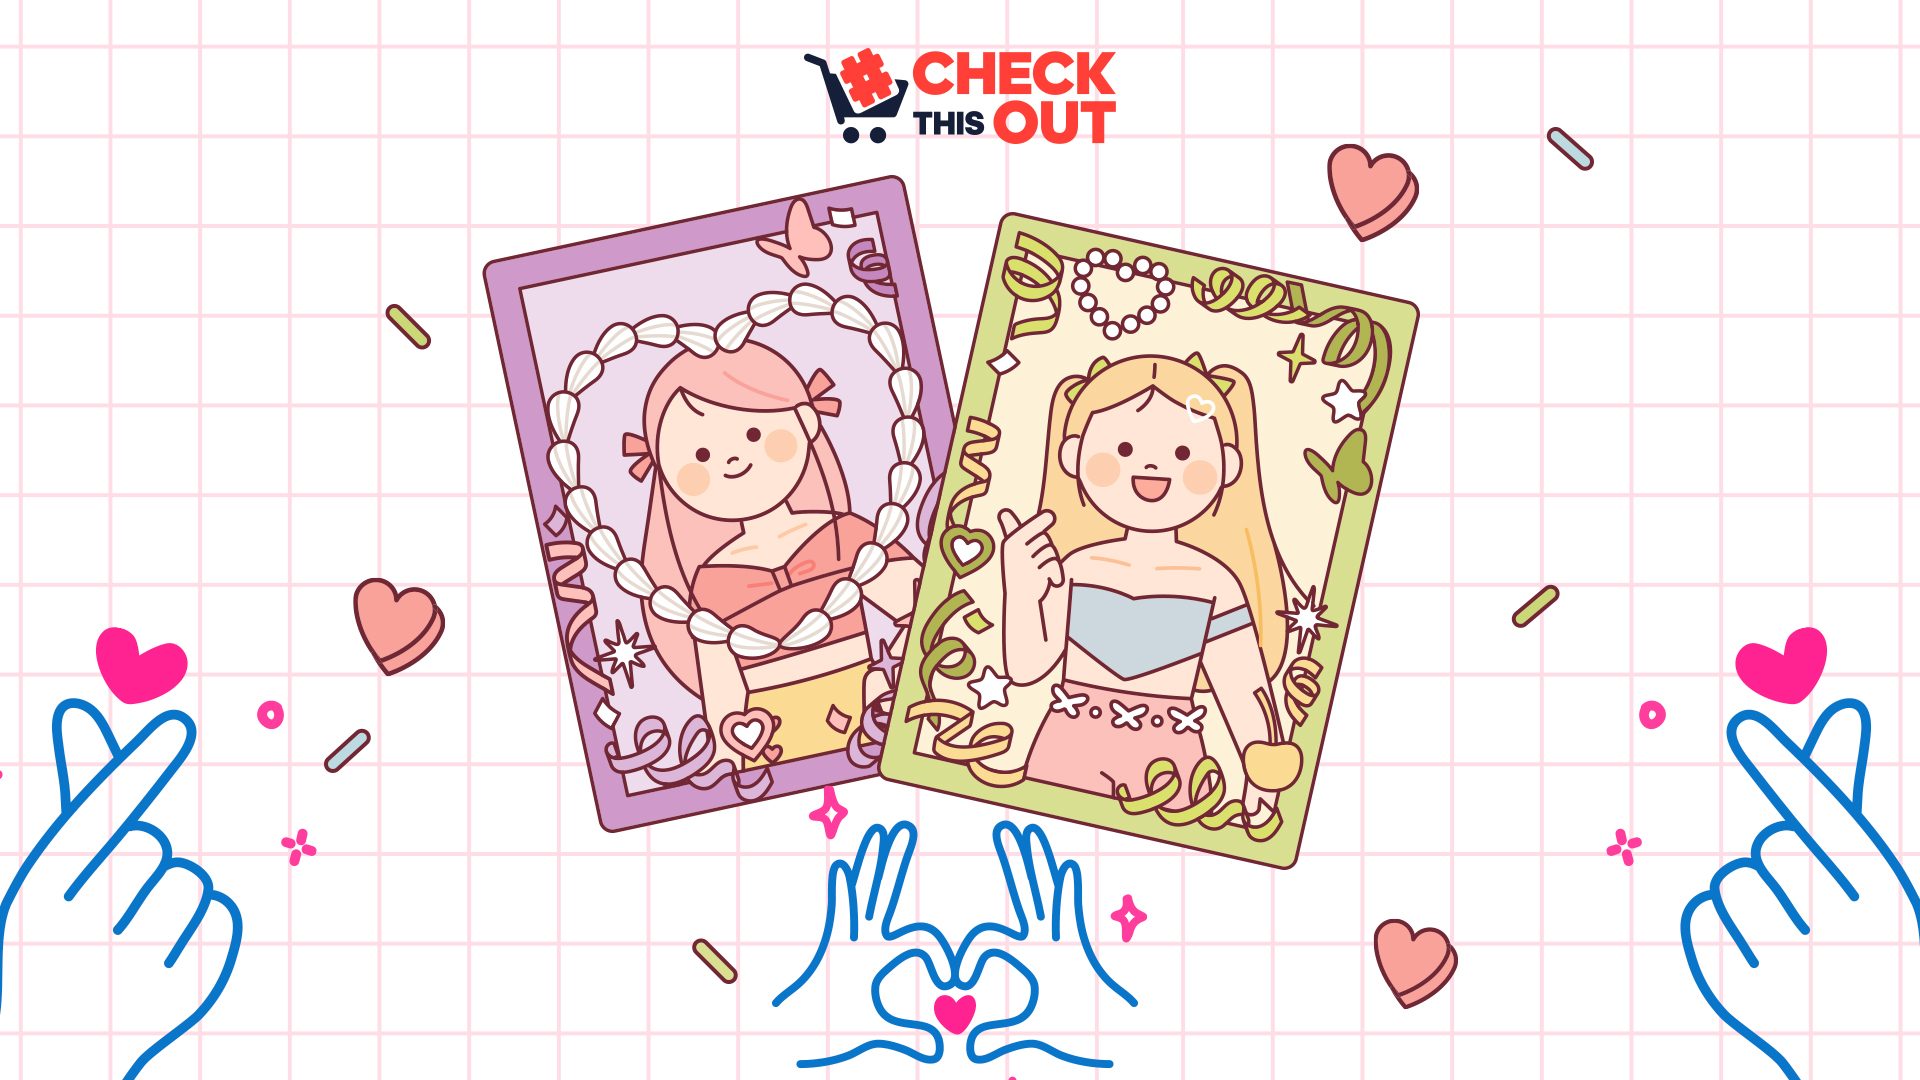 CheckThisOut: Tools to help you protect your K-pop photocards